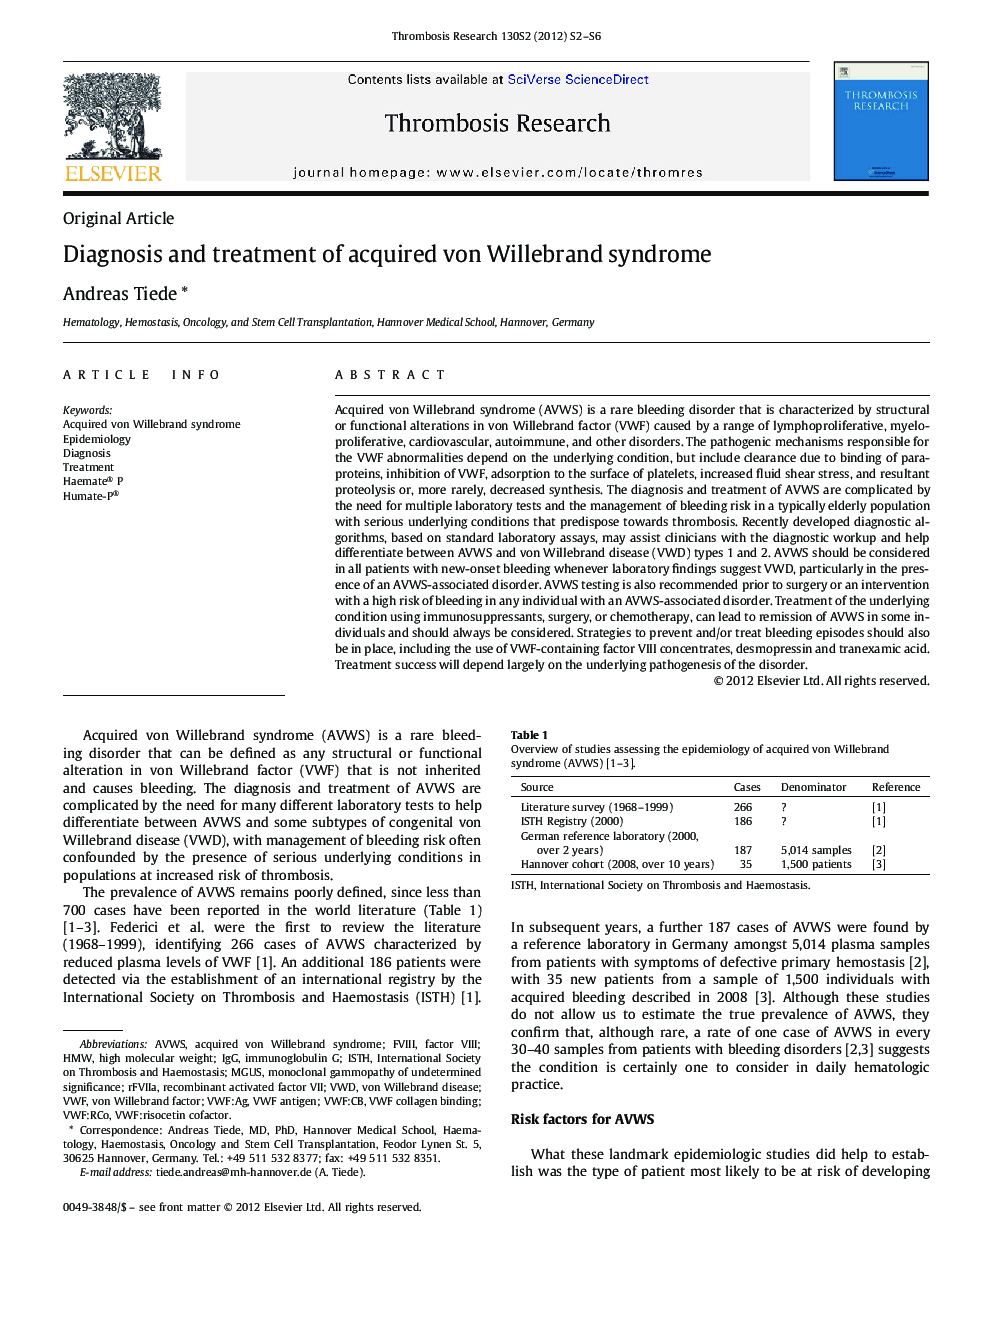 Diagnosis and treatment of acquired von Willebrand syndrome 